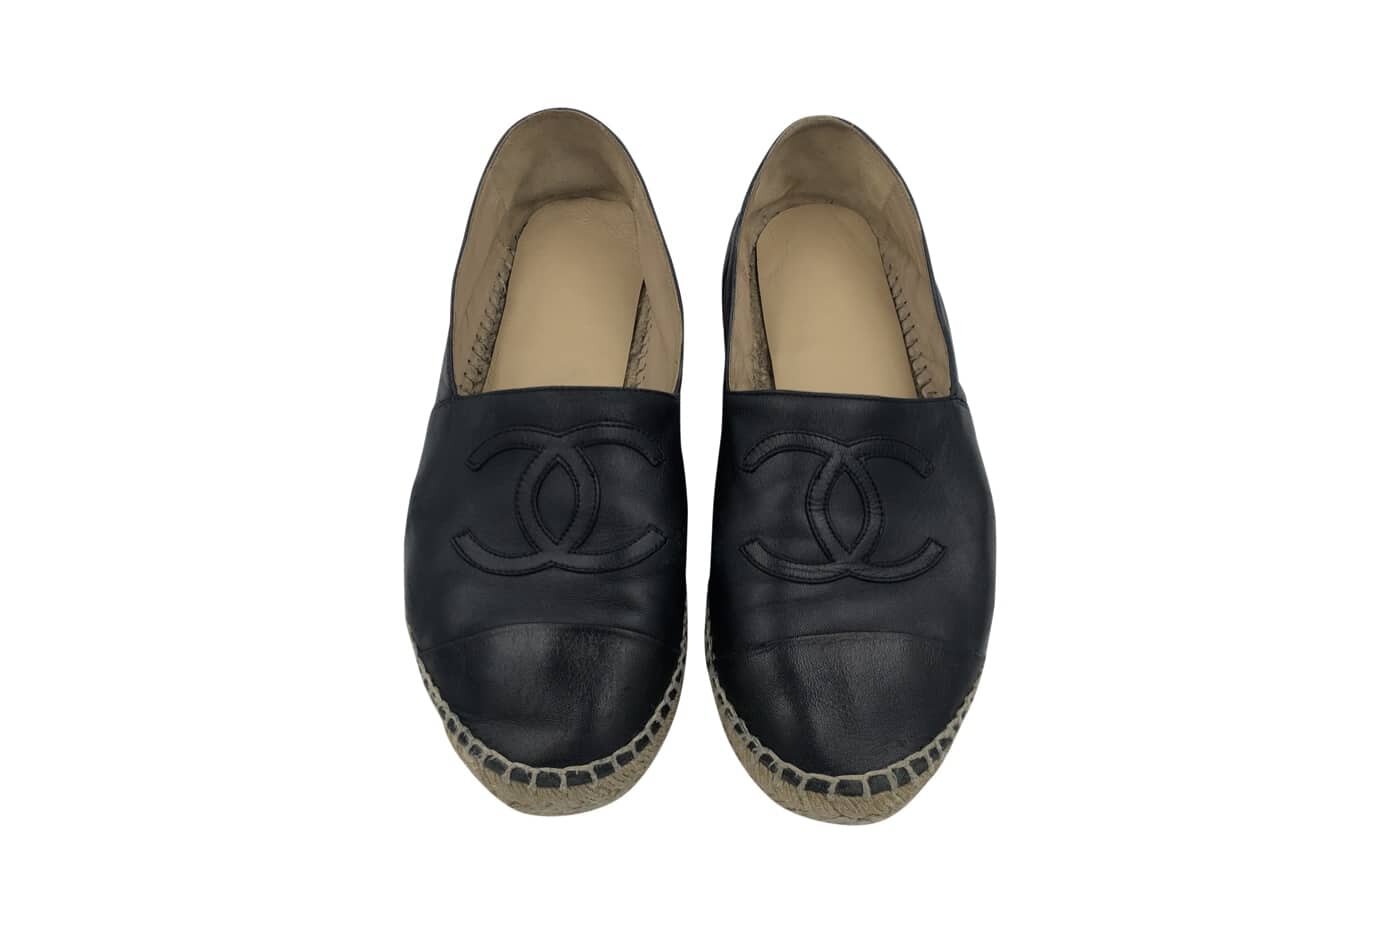 Every It Girl Loves A Chanel Double C Espadrille